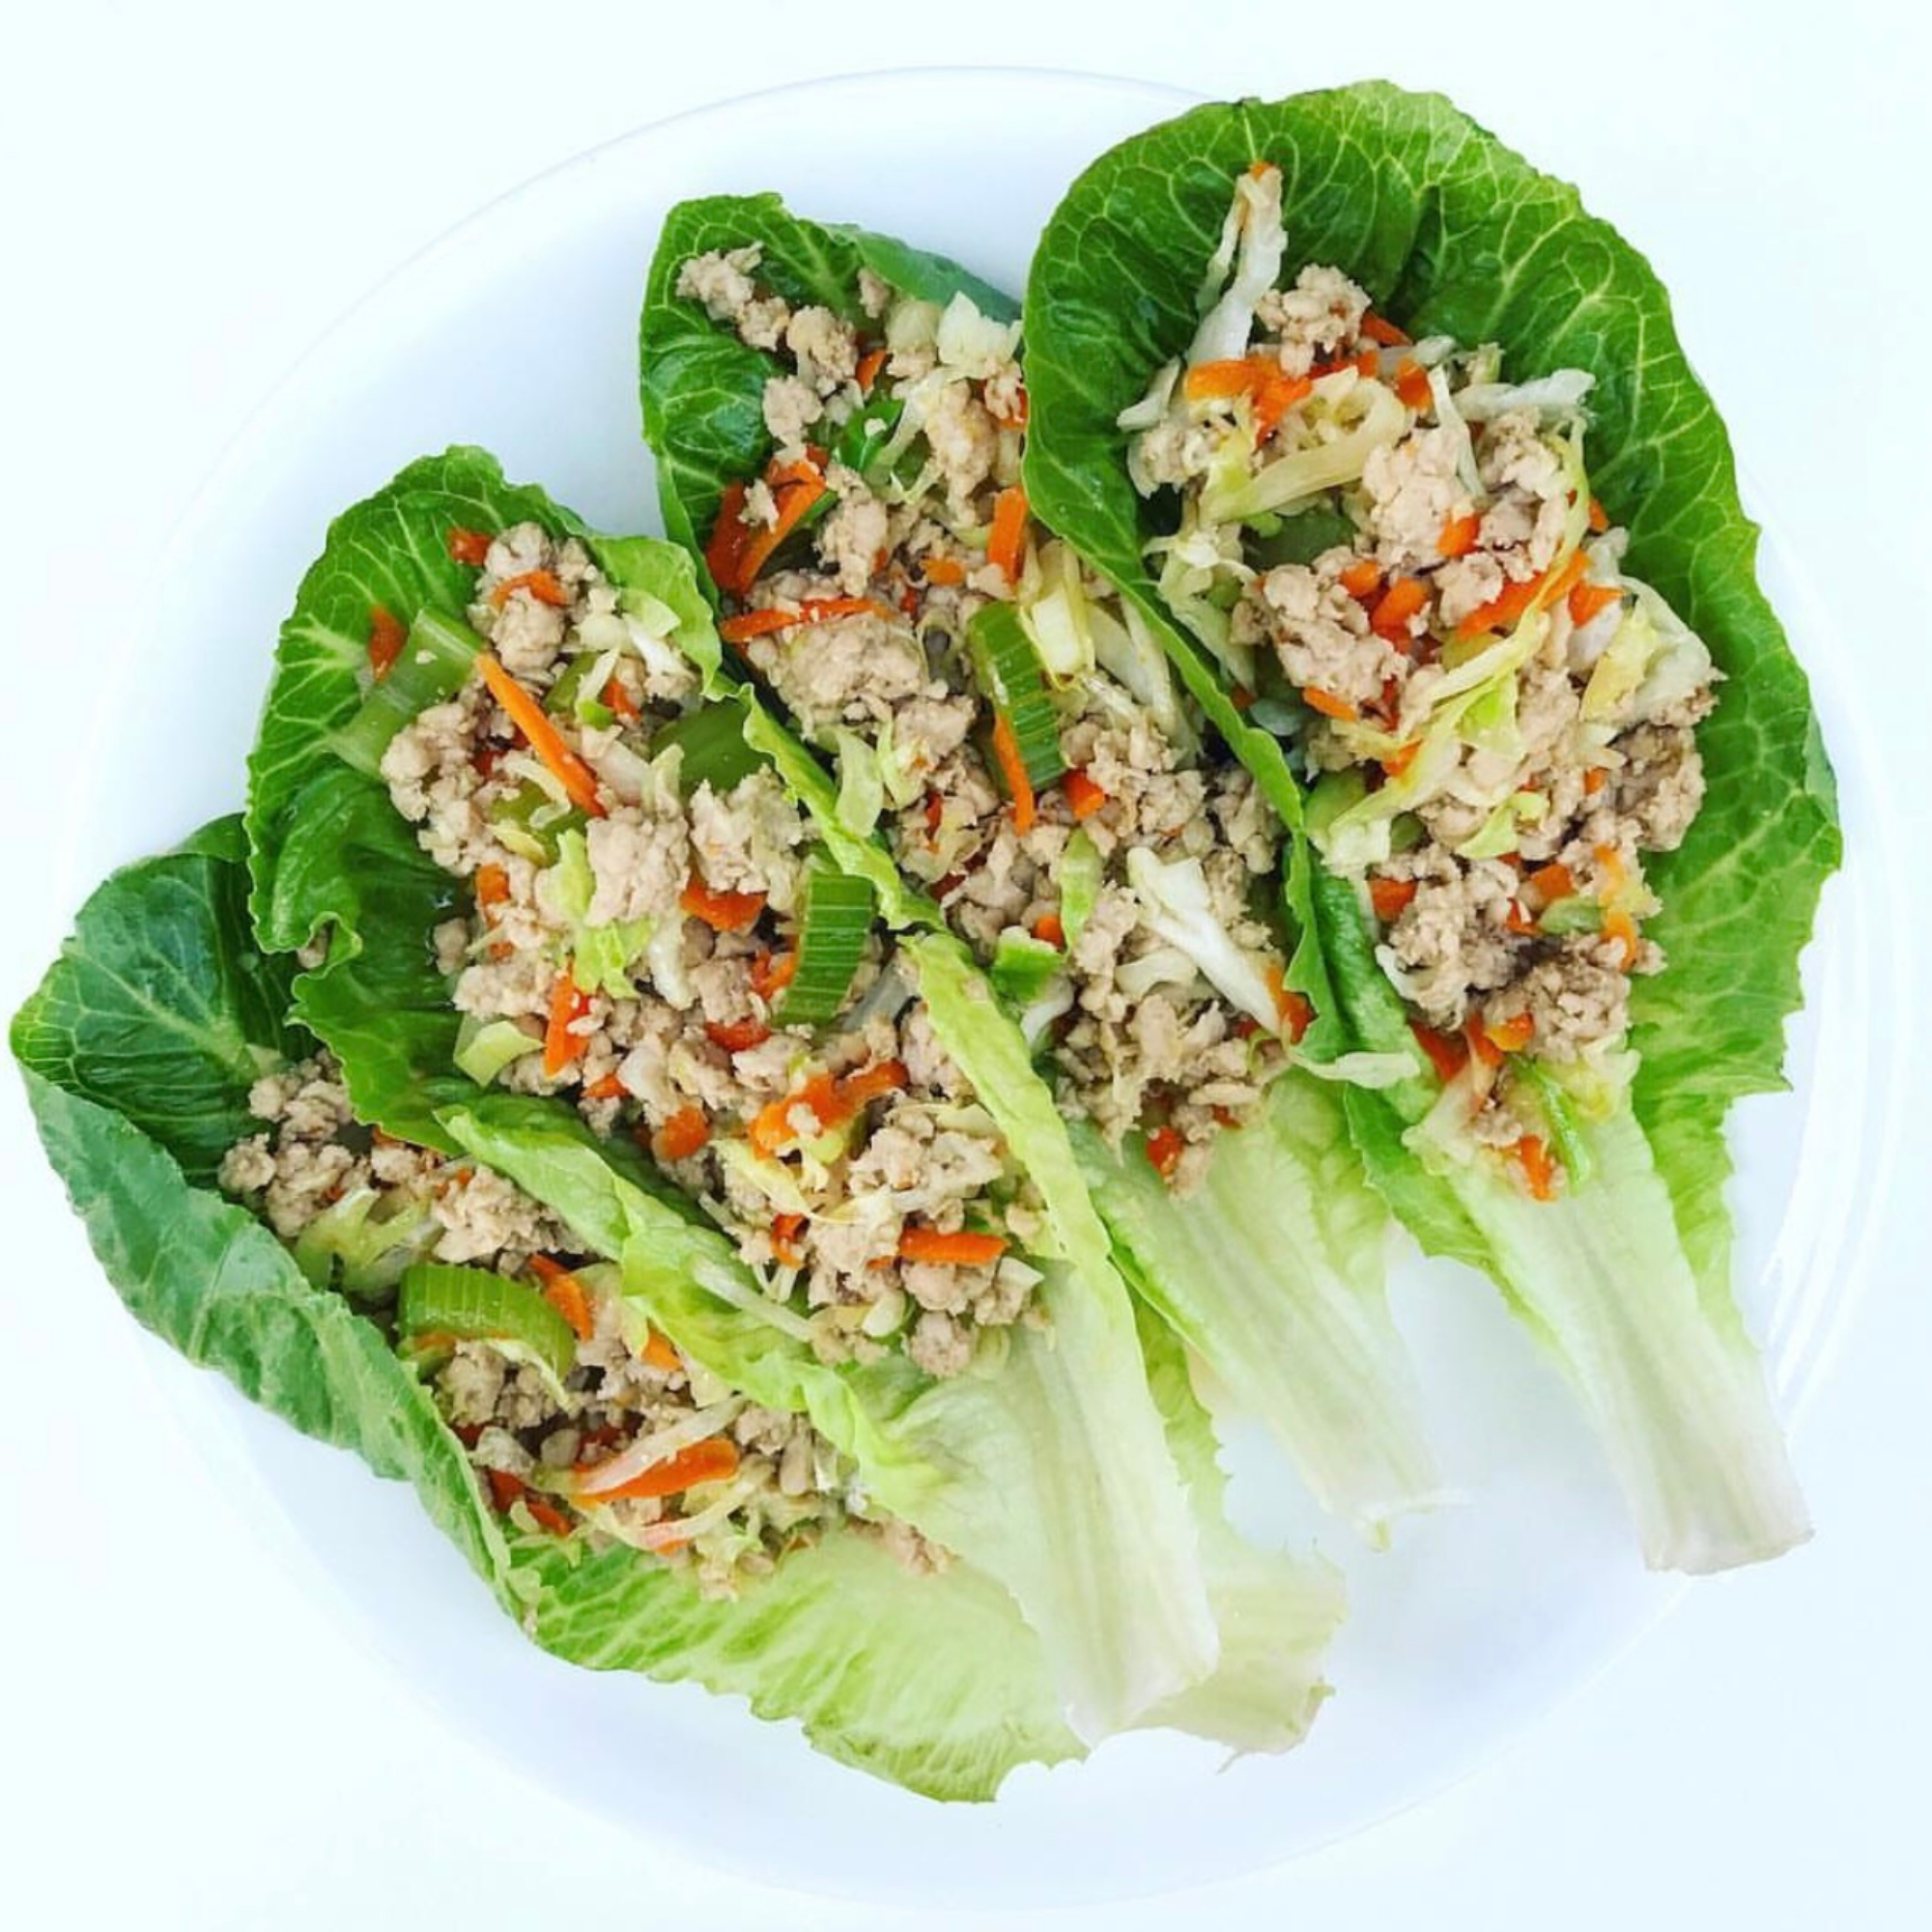 four lettuce wraps laid out on a white surface that are stuffed with a naked eggroll filling of cabbage, shredded carrots and chicken